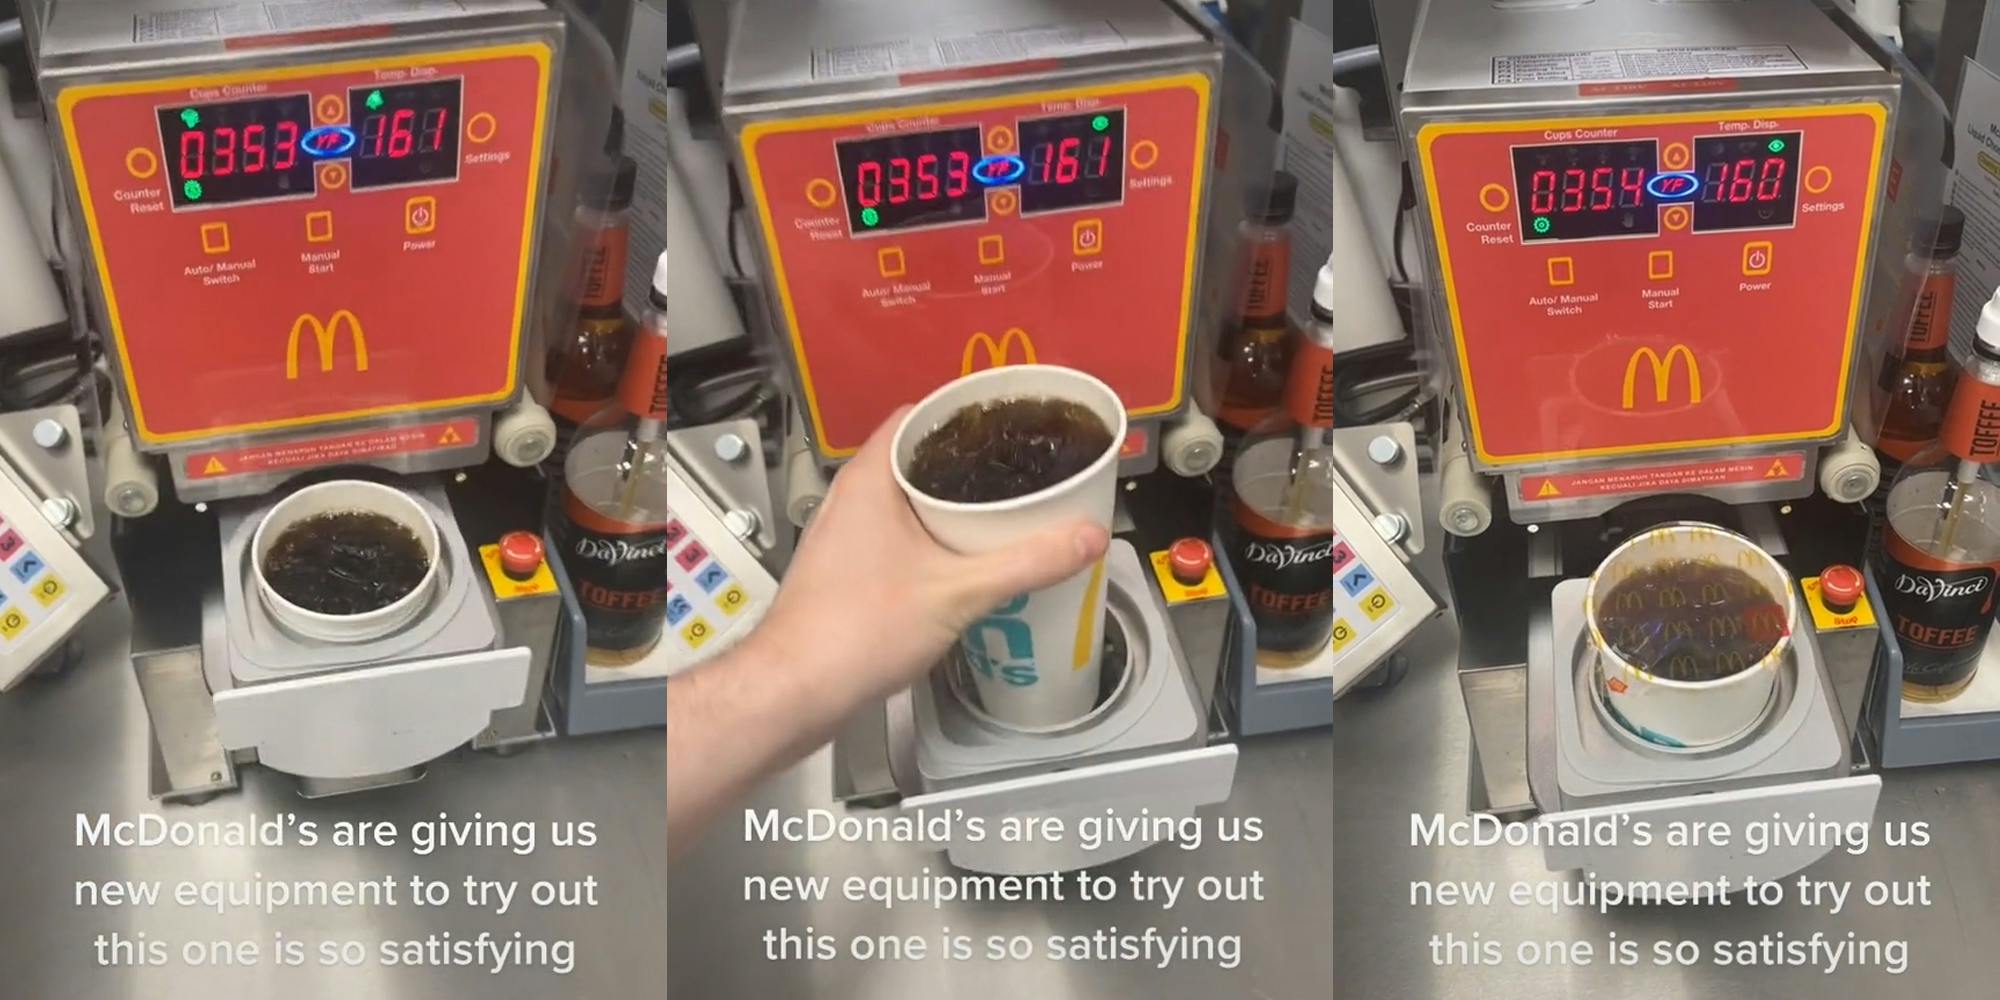 McDonald's new cup sealer with drink in it caption "McDonald's are giving us new equipment to try out this one is so satisfying" (l) McDonald's new cup sealer with employee loading drink caption "McDonald's are giving us new equipment to try out this one is so satisfying" (c) Mcdonald's new drink sealer with finished sealed drink in it caption "McDonald's are giving us new equipment to try out this one is so satisfying" (r)